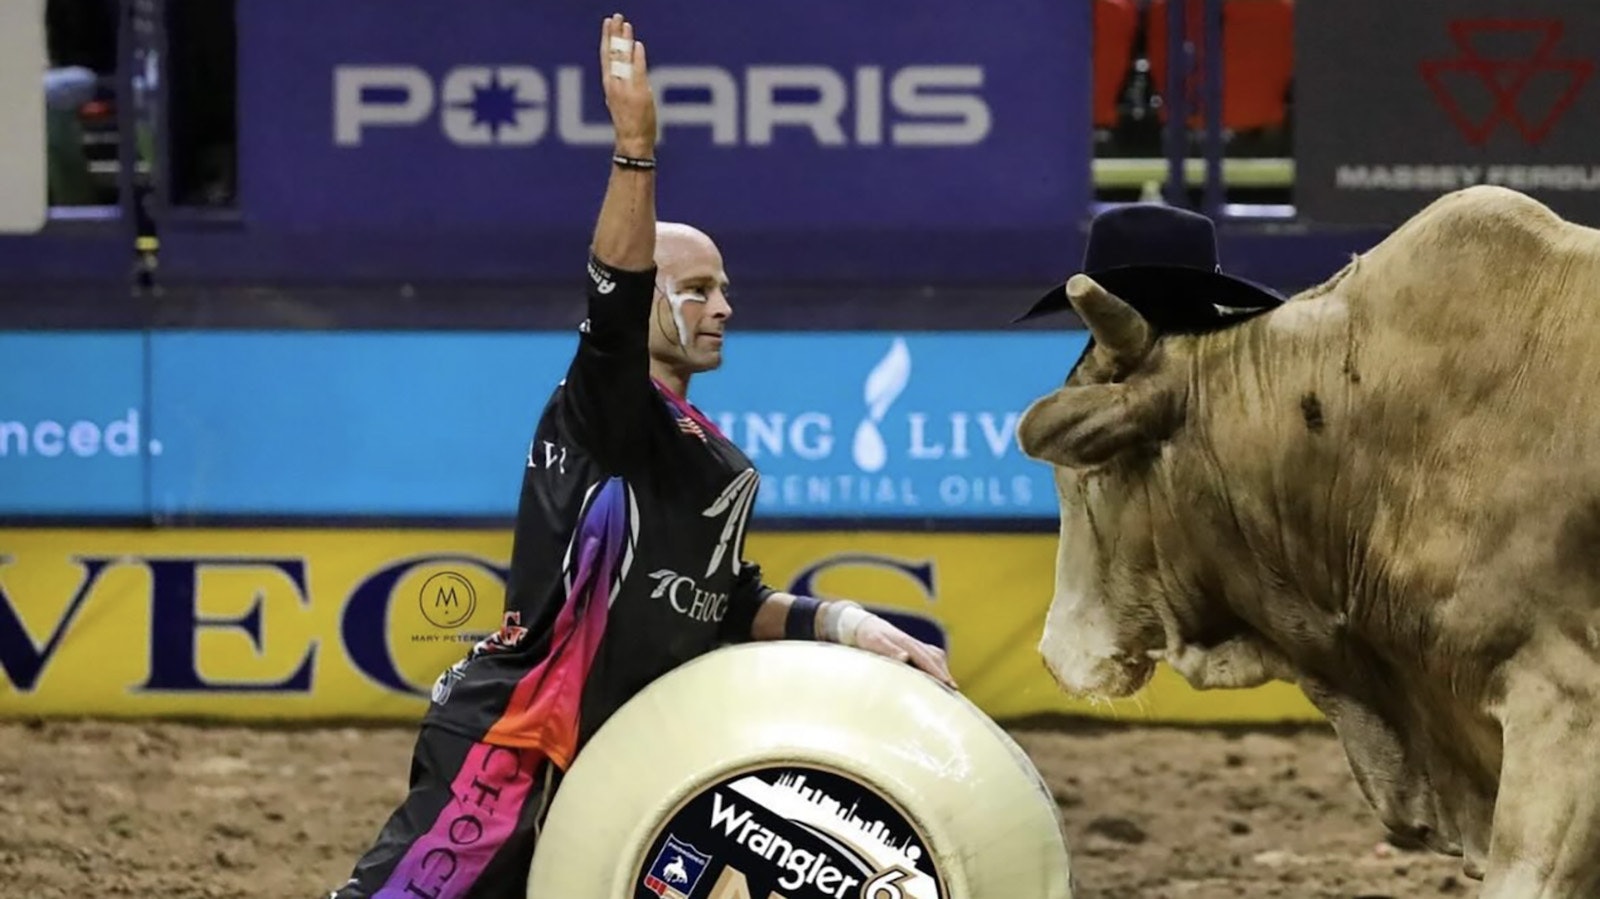 Dusty Tuckness has a little fun with a rank bull at the 2023 National Finals Rodeo.